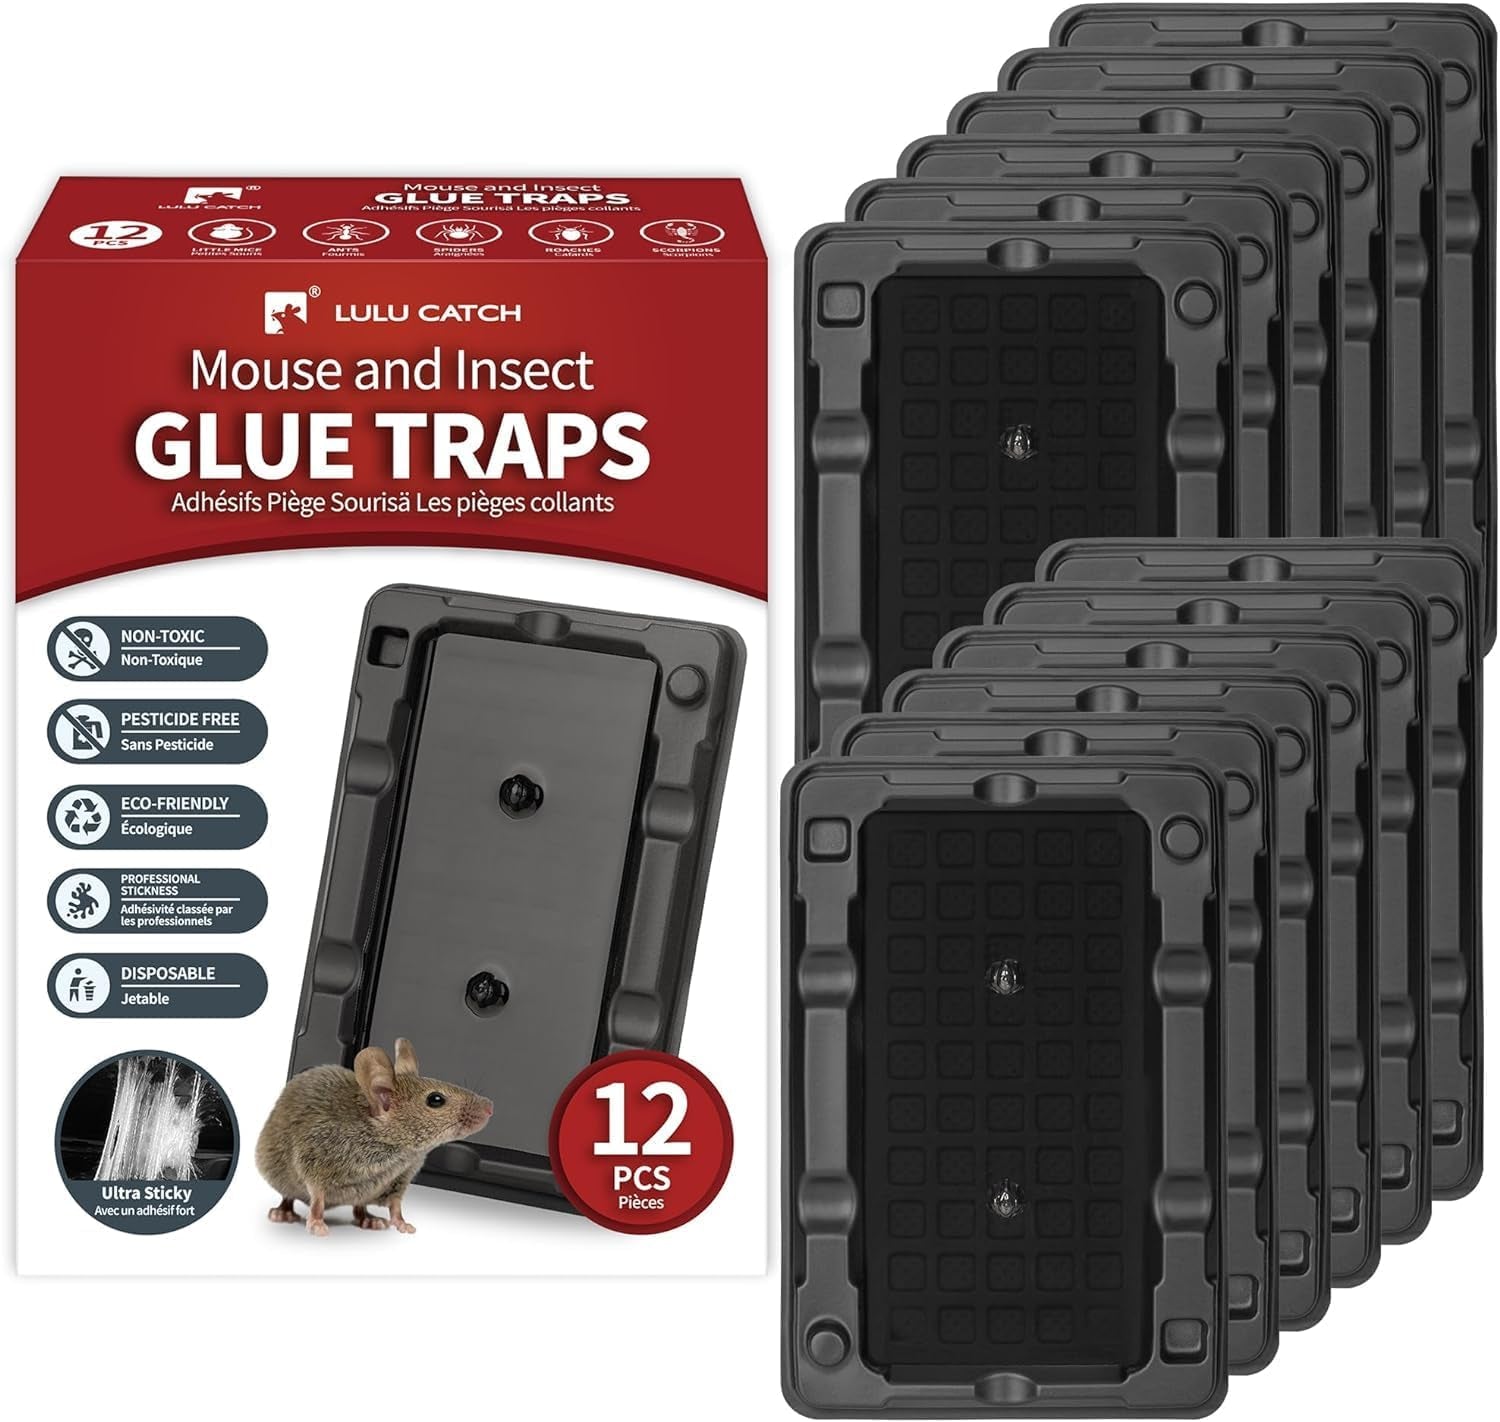 Why is the TrapX AI ML-powered mice trap attachment patented?